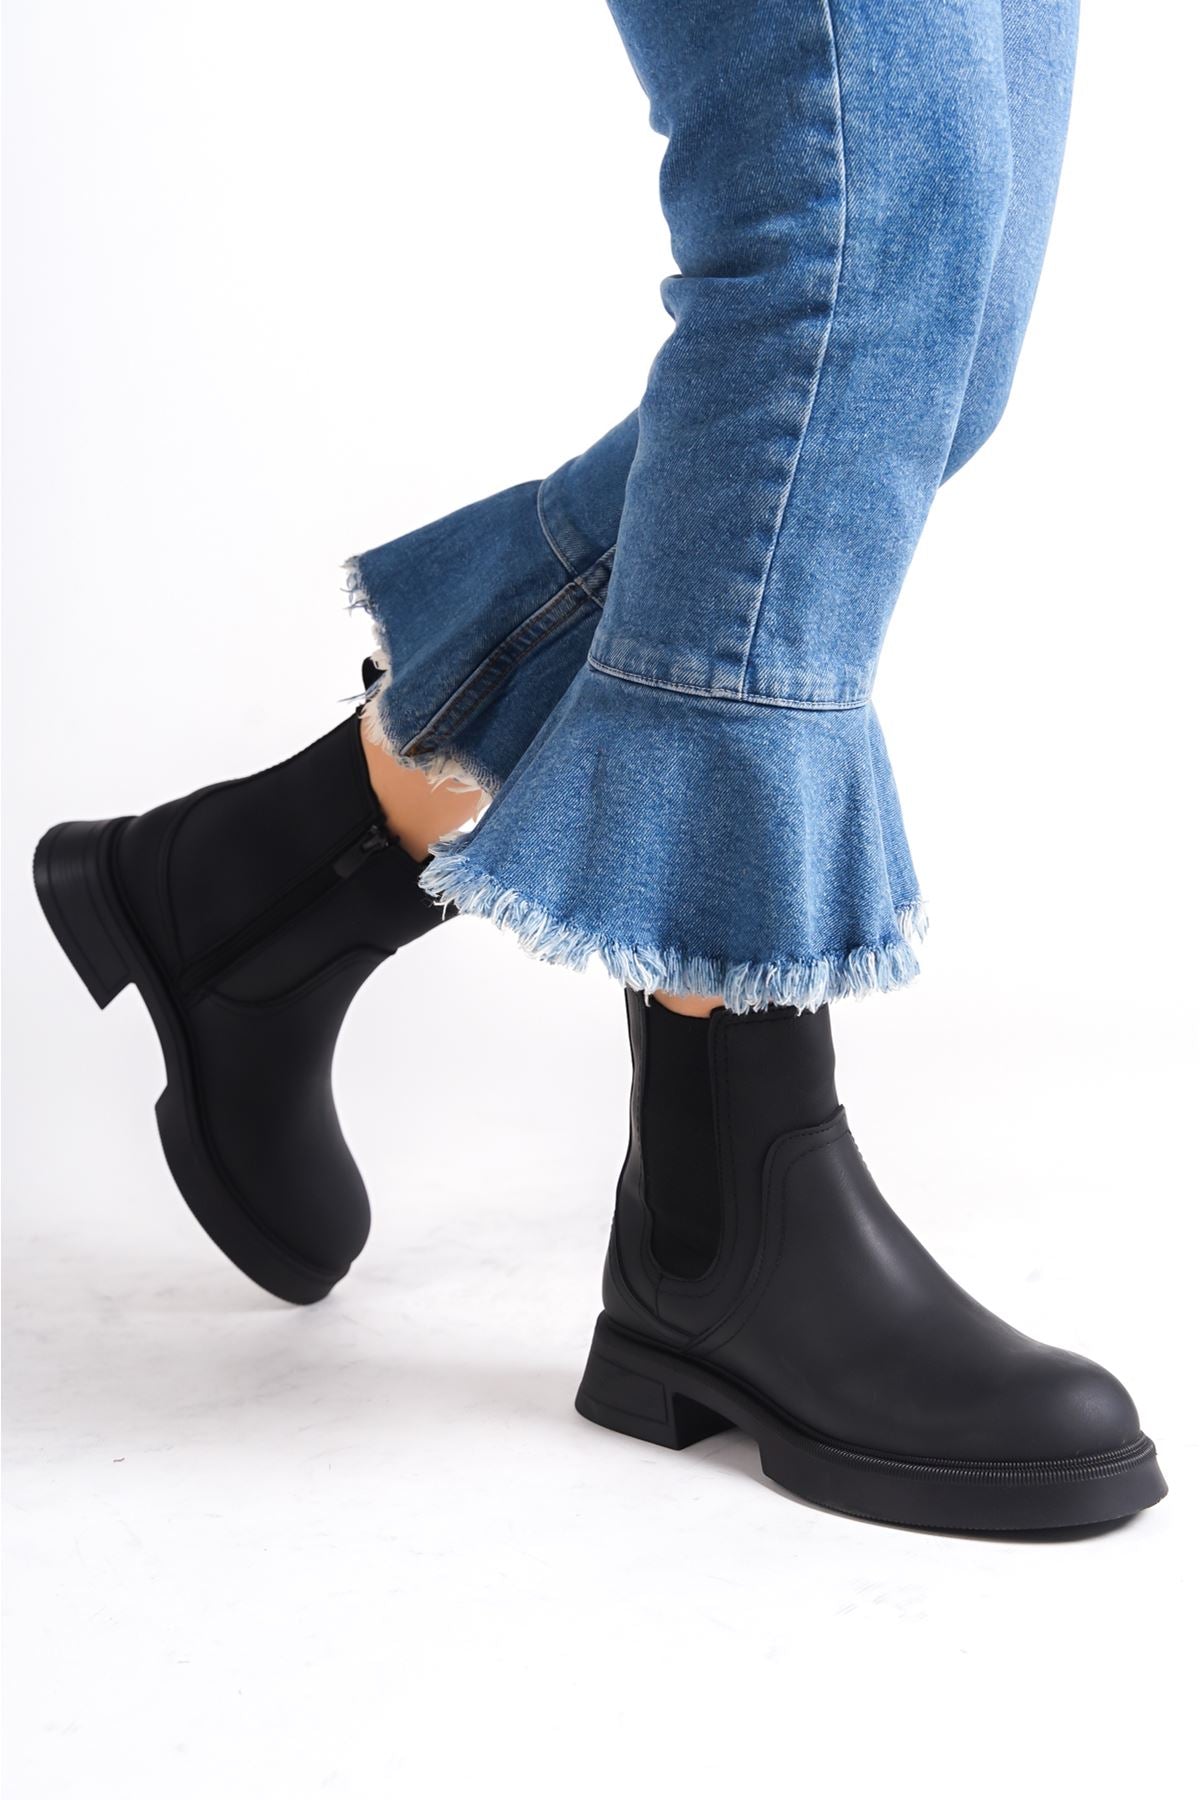 Dalpa Black Women's Boots with Elastic Sides